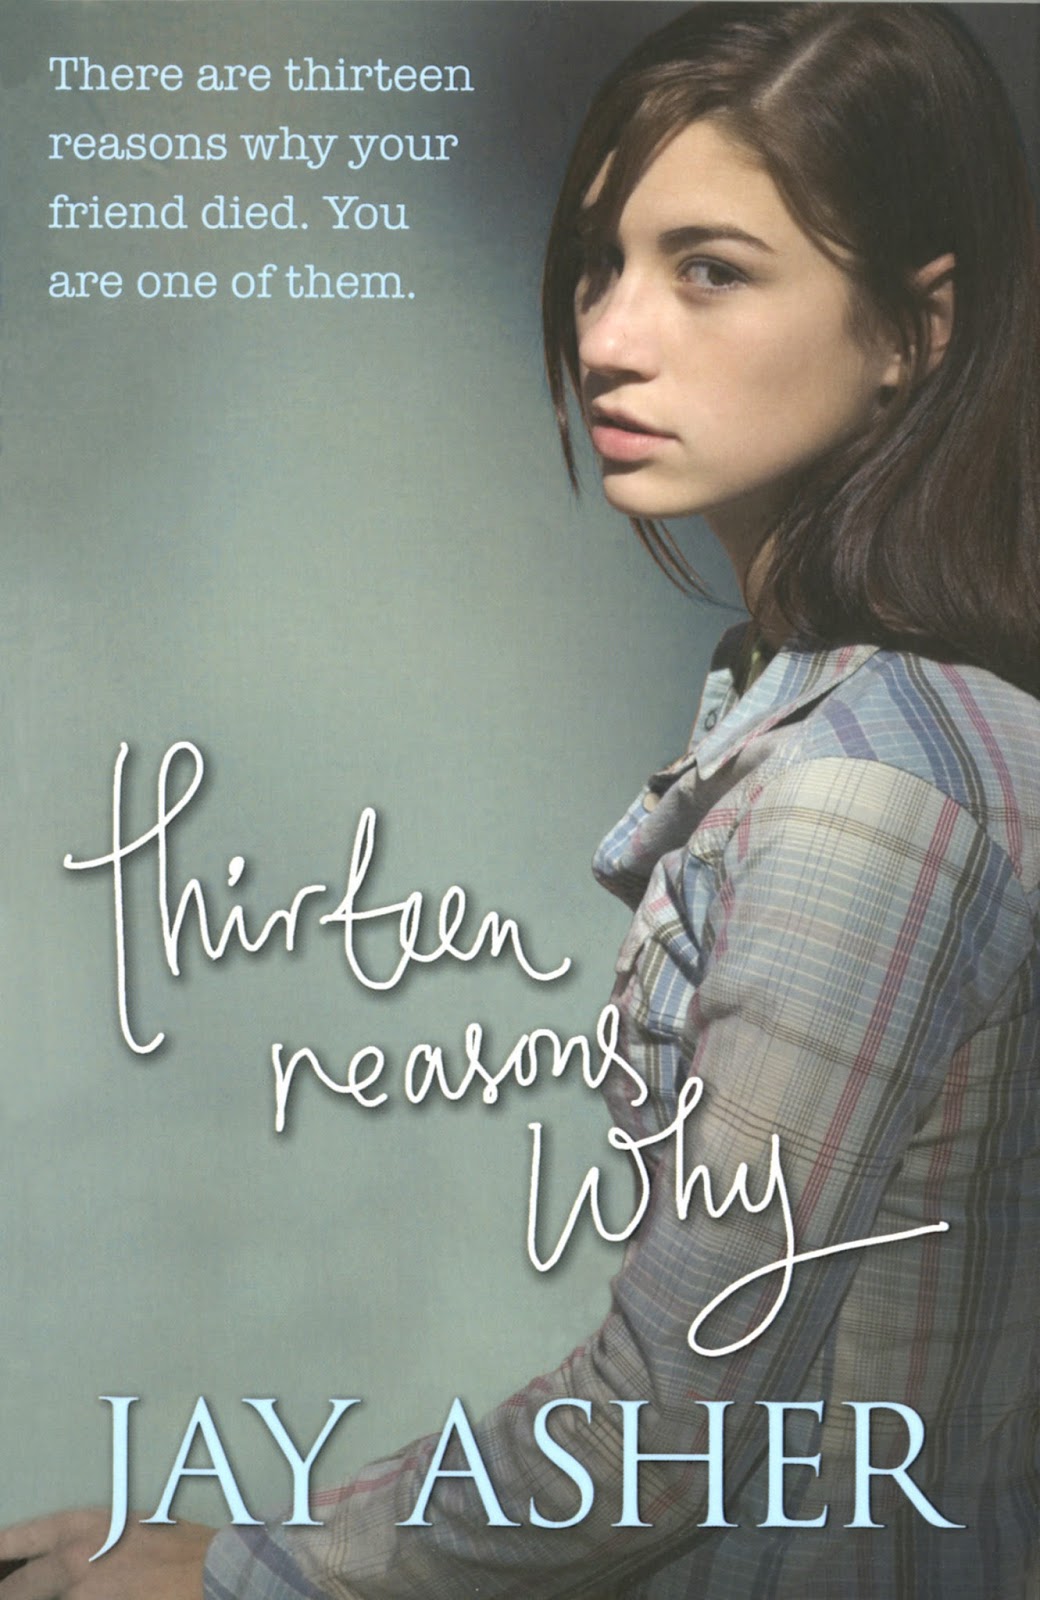 book review on 13 reasons why